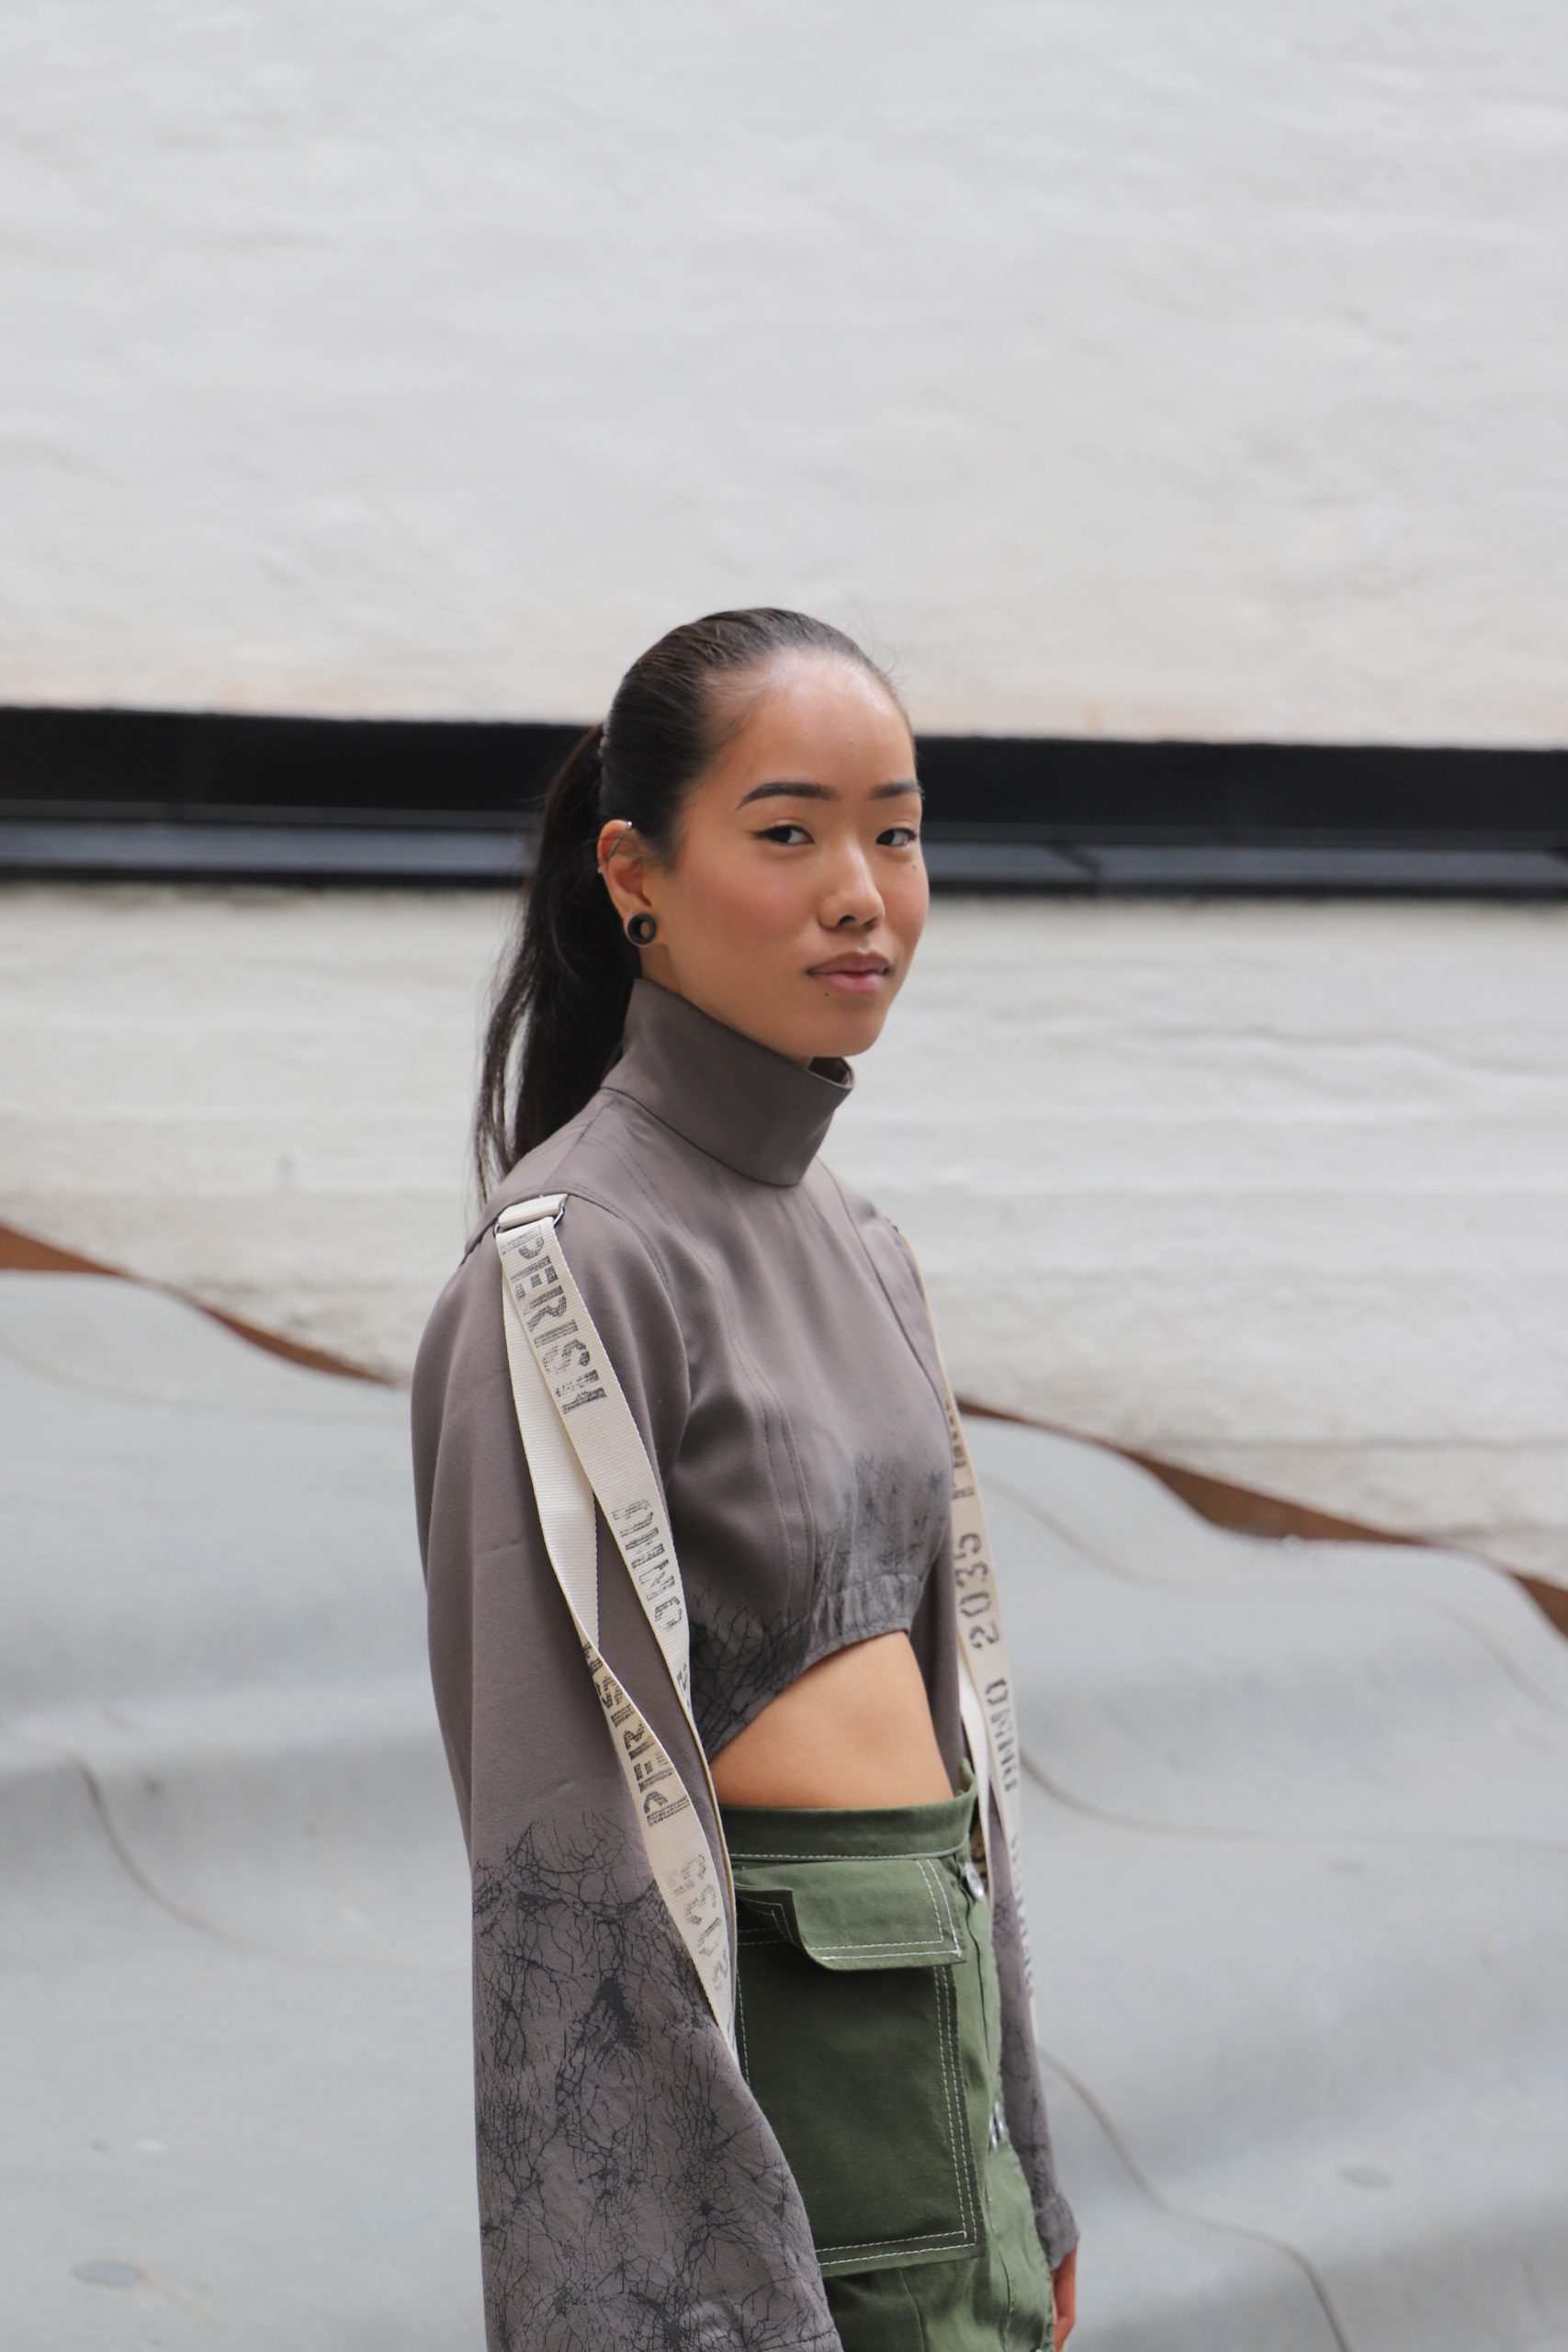 Anna wearing a grey cropped turtleneck with white straps on sleeves paired with a green skirt with cargo pocket.